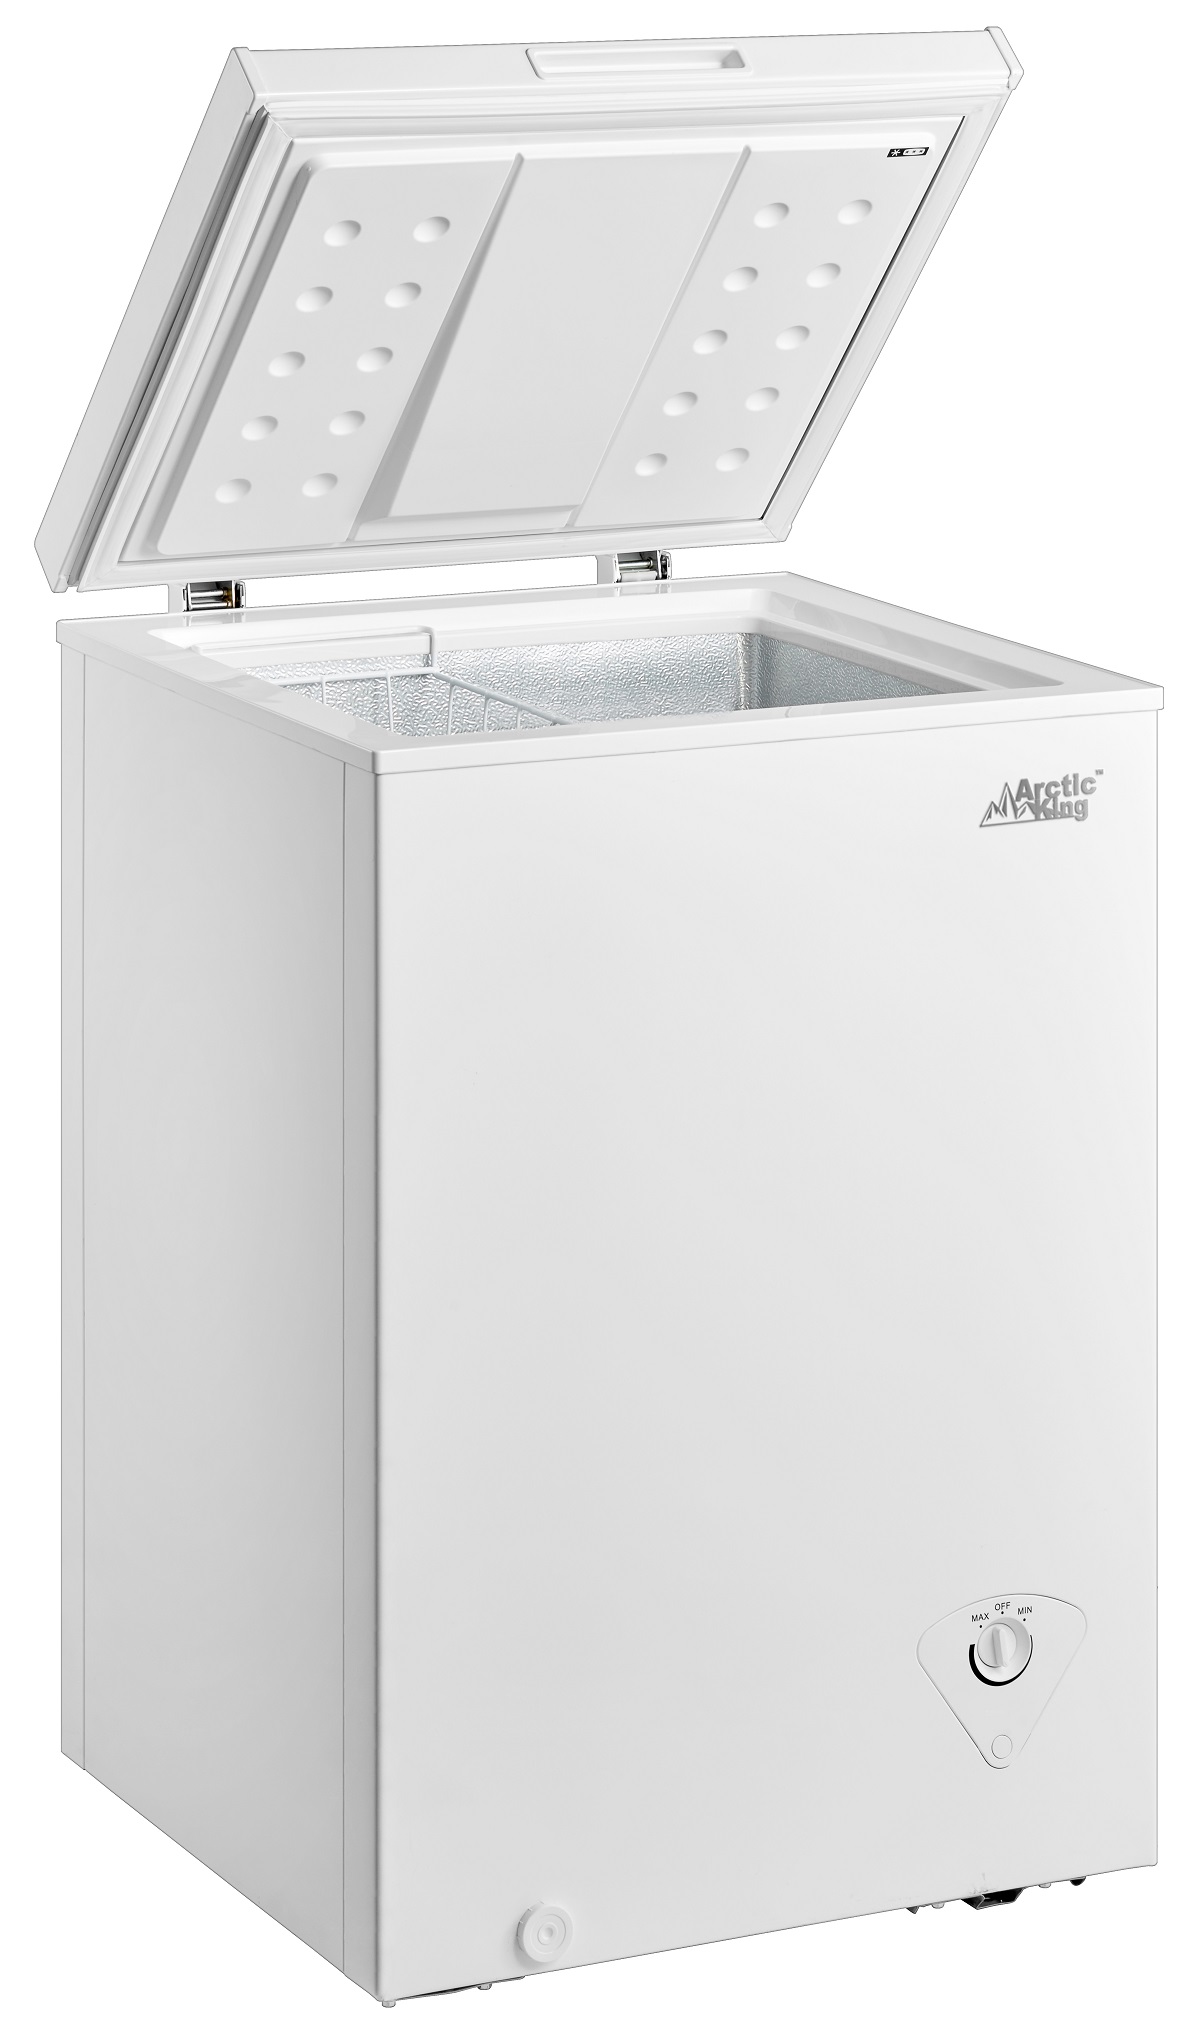 Arctic King 3.5 Cu ft Chest Freezer, White - image 2 of 5